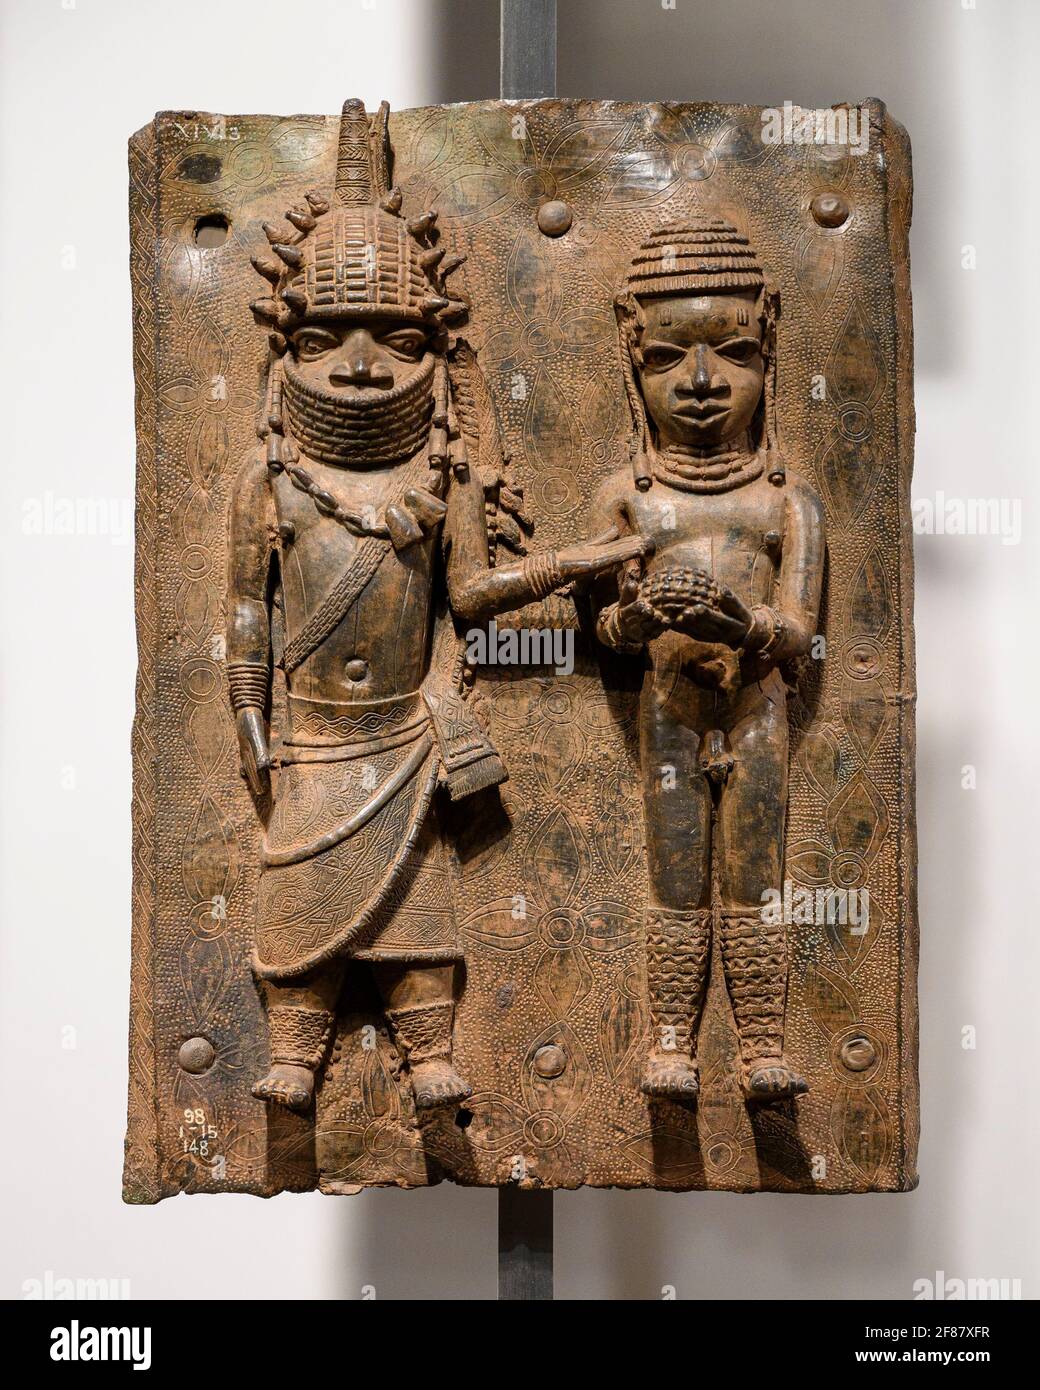 London. England. Benin Bronzes on display at the British Museum, brass plaques from the royal court palace of the Kingdom of Benin, 16-17th century. Stock Photo